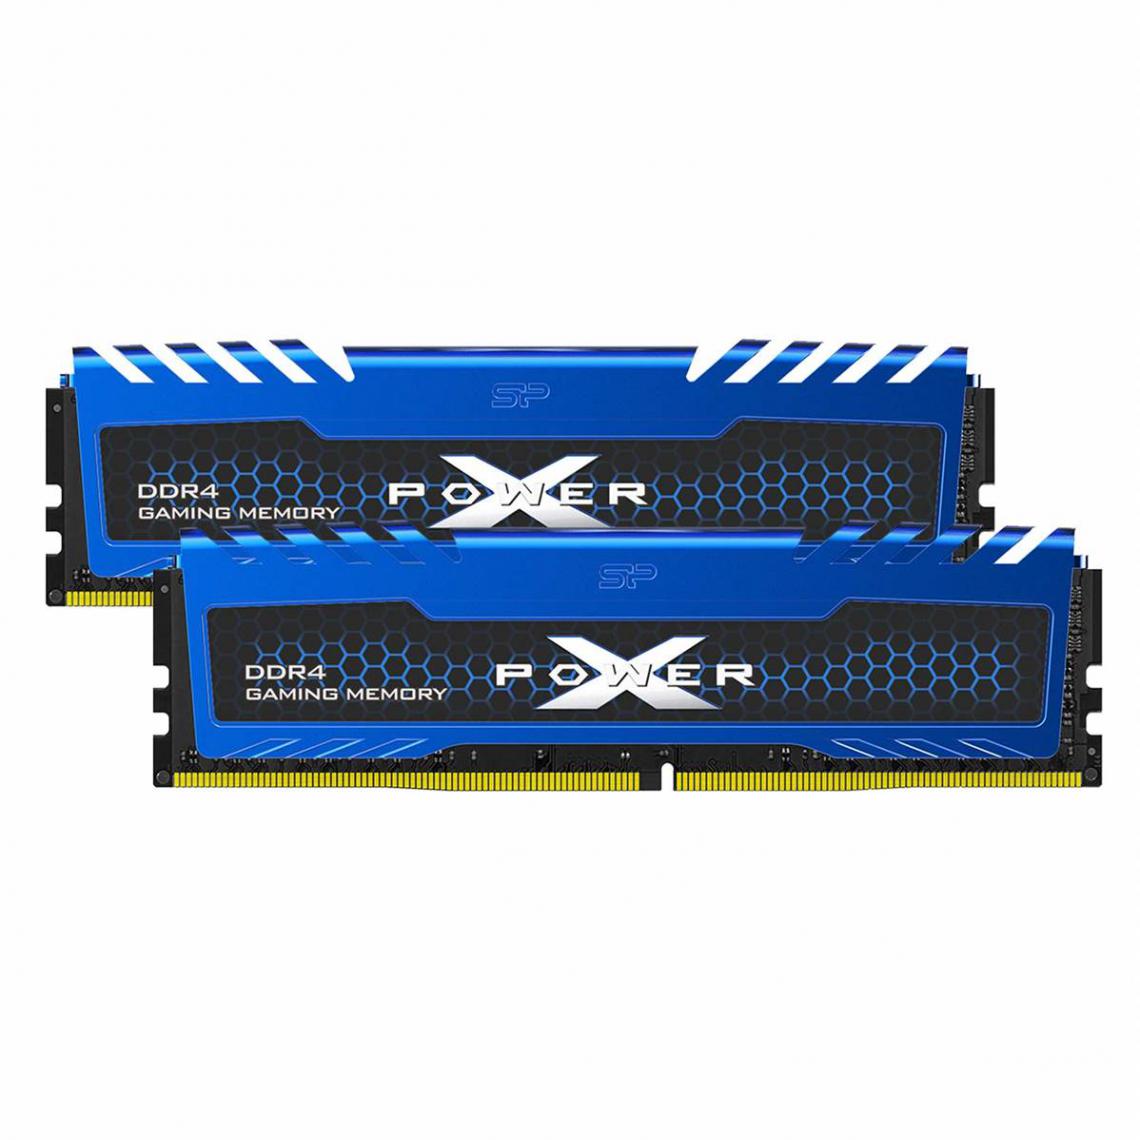 Silicon power - SILICON POWER Mémoire DDR4-3200 CL16 UDIMM 16Go (2x8Go) - RAM PC Fixe